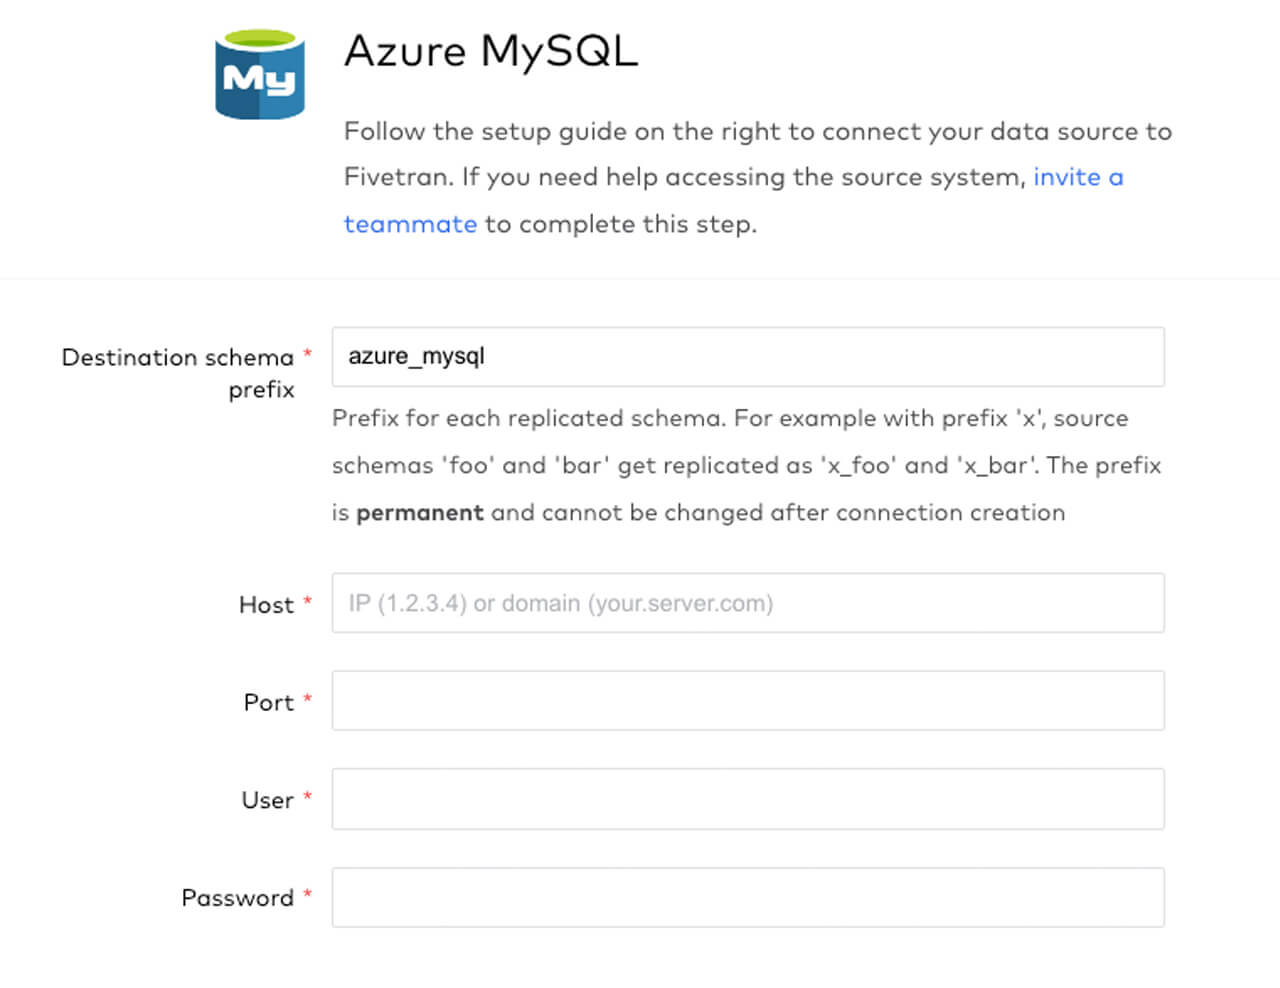 Setting up the connection between Azure MySQL and Fivetran